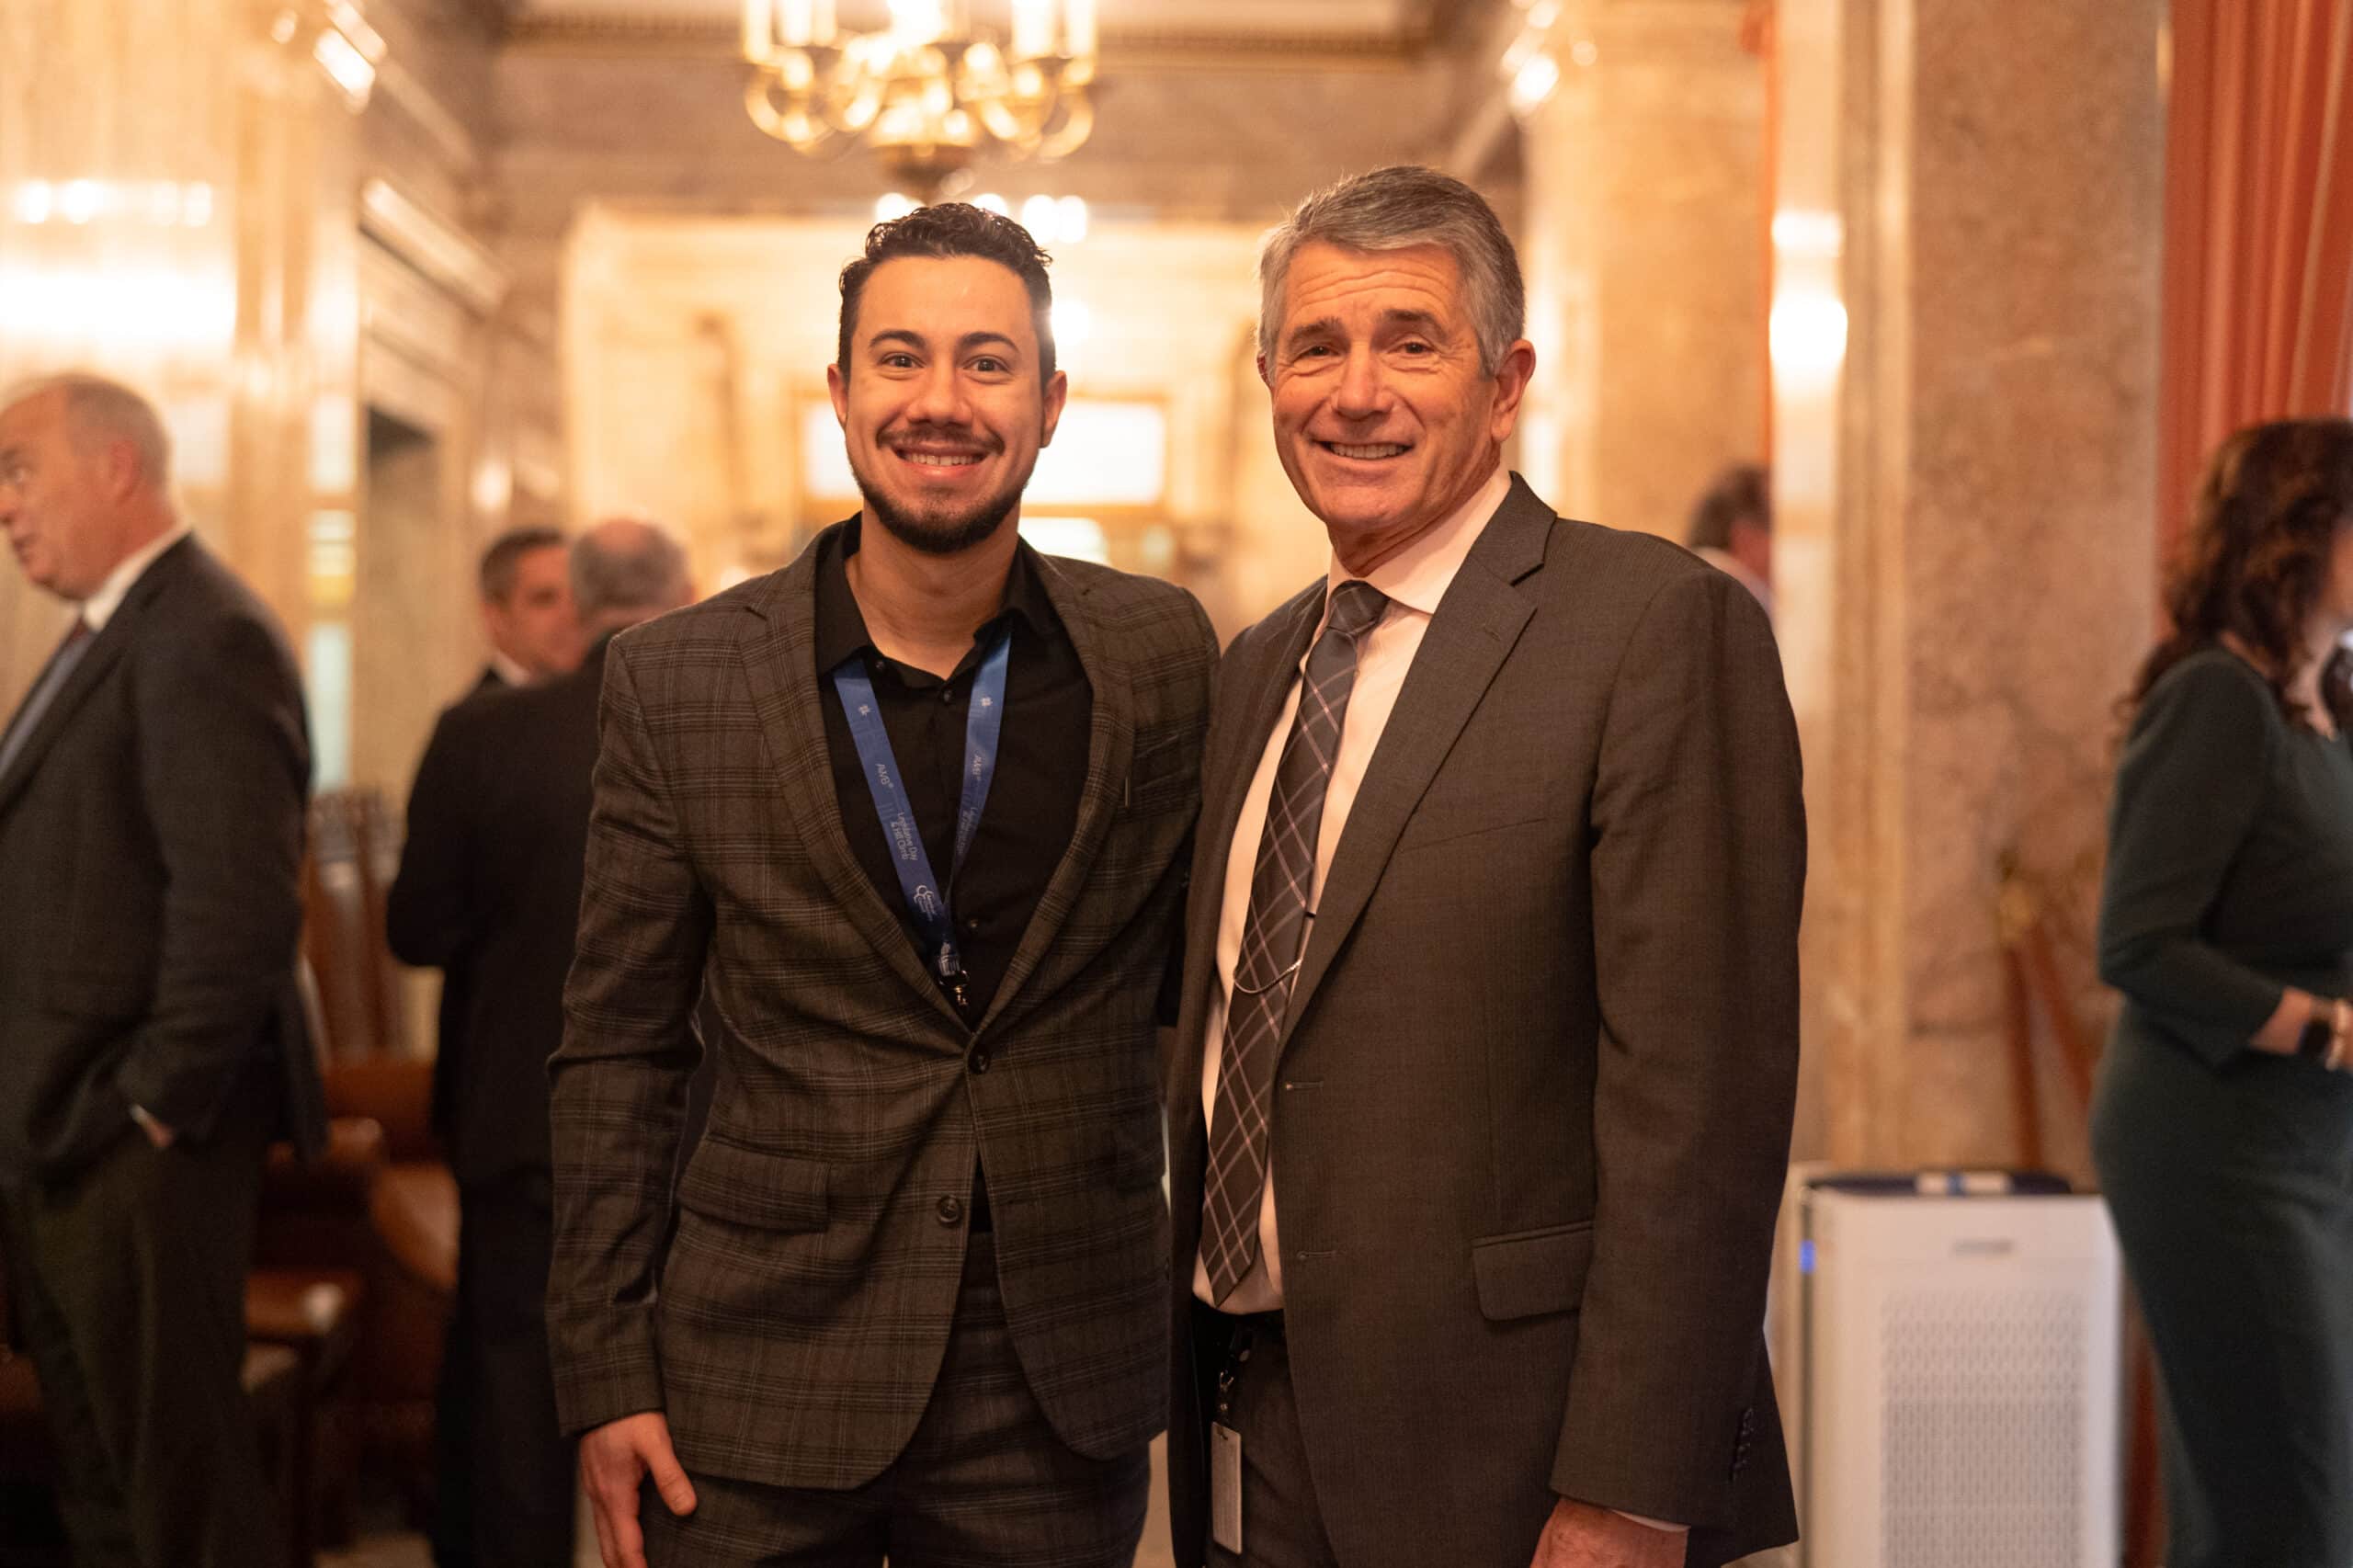 SkillSource participant Domenico Tadeschi stands in the hallway of the Washington State Capitol with Representative Keith Goehner.